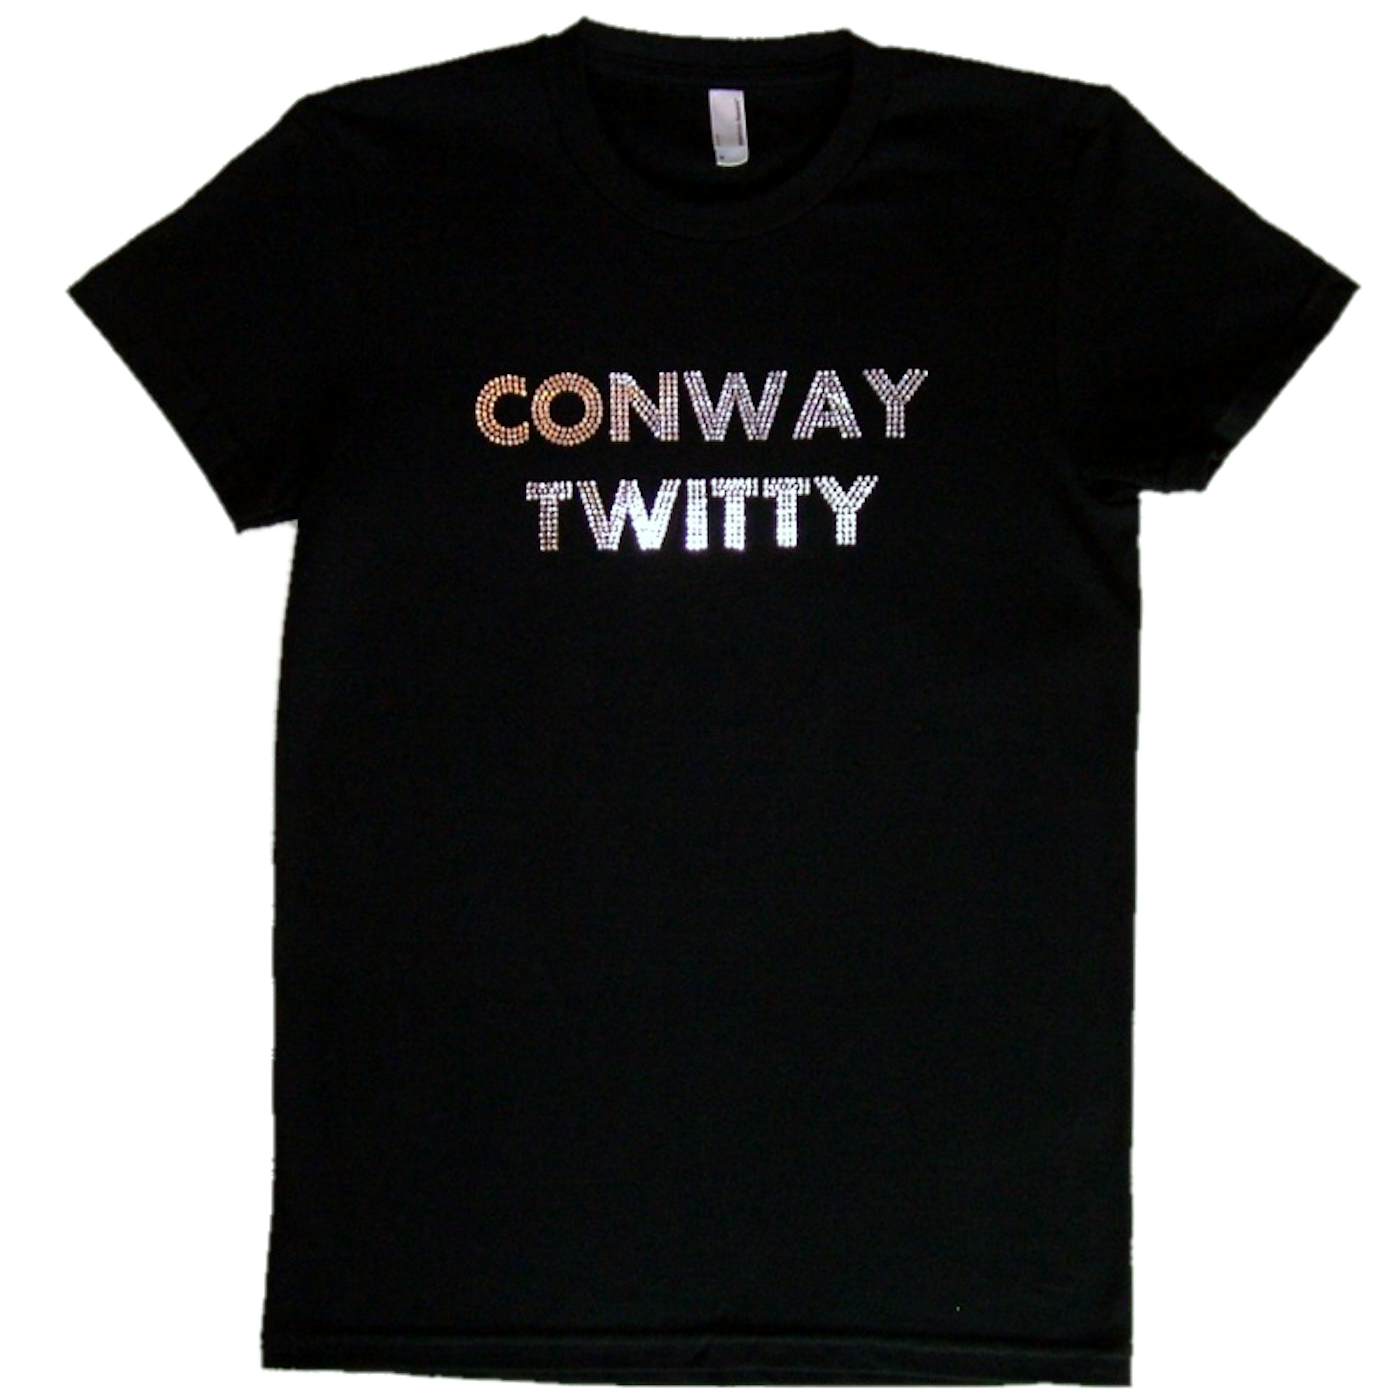 Conway Twitty Ladies Black Tee-Silver